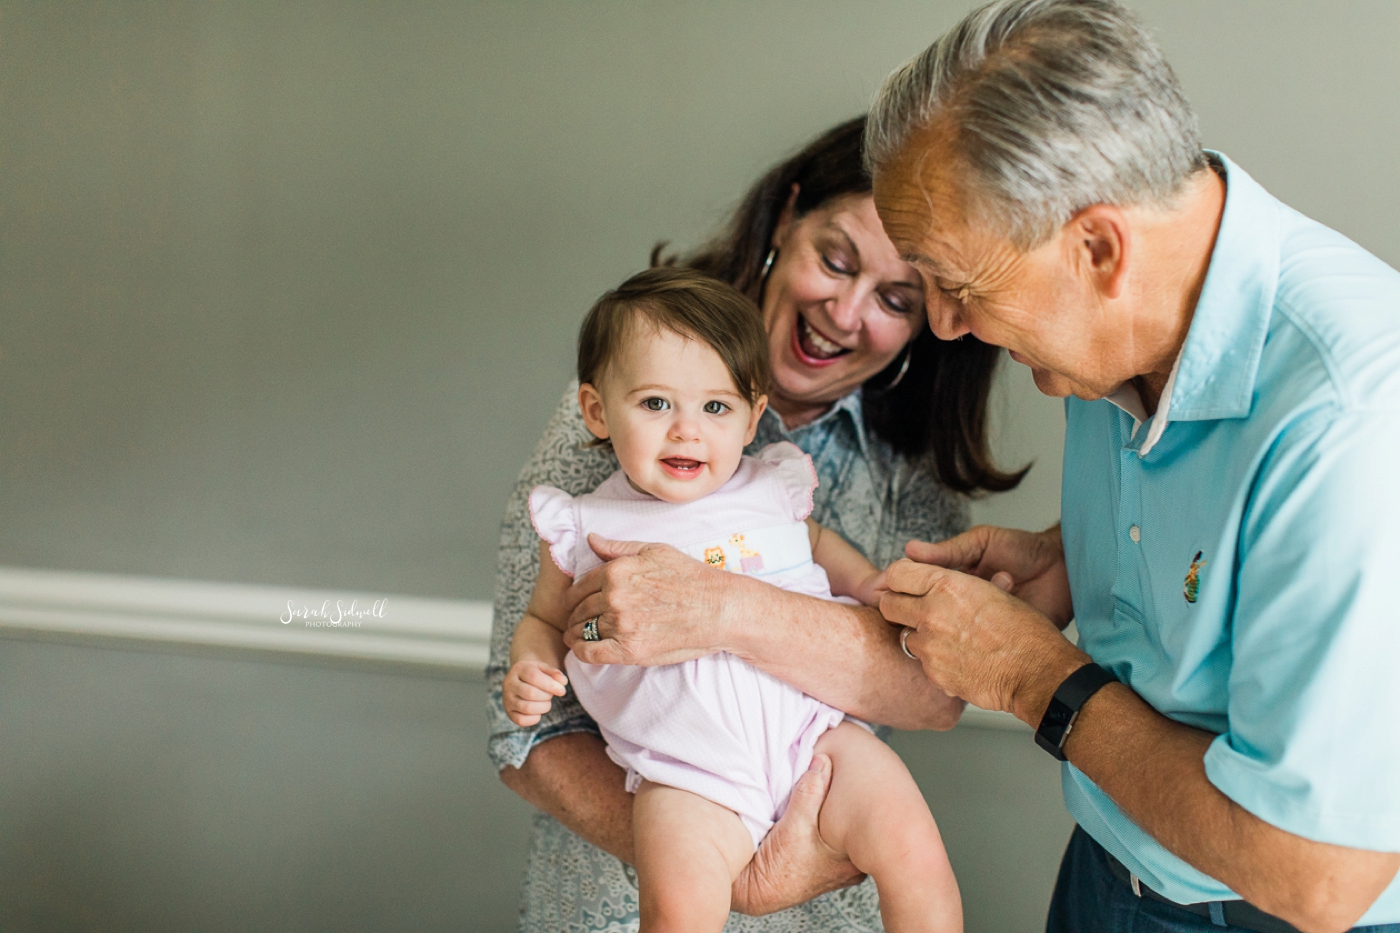 First Birthday Session | Sarah Sidwell Photography